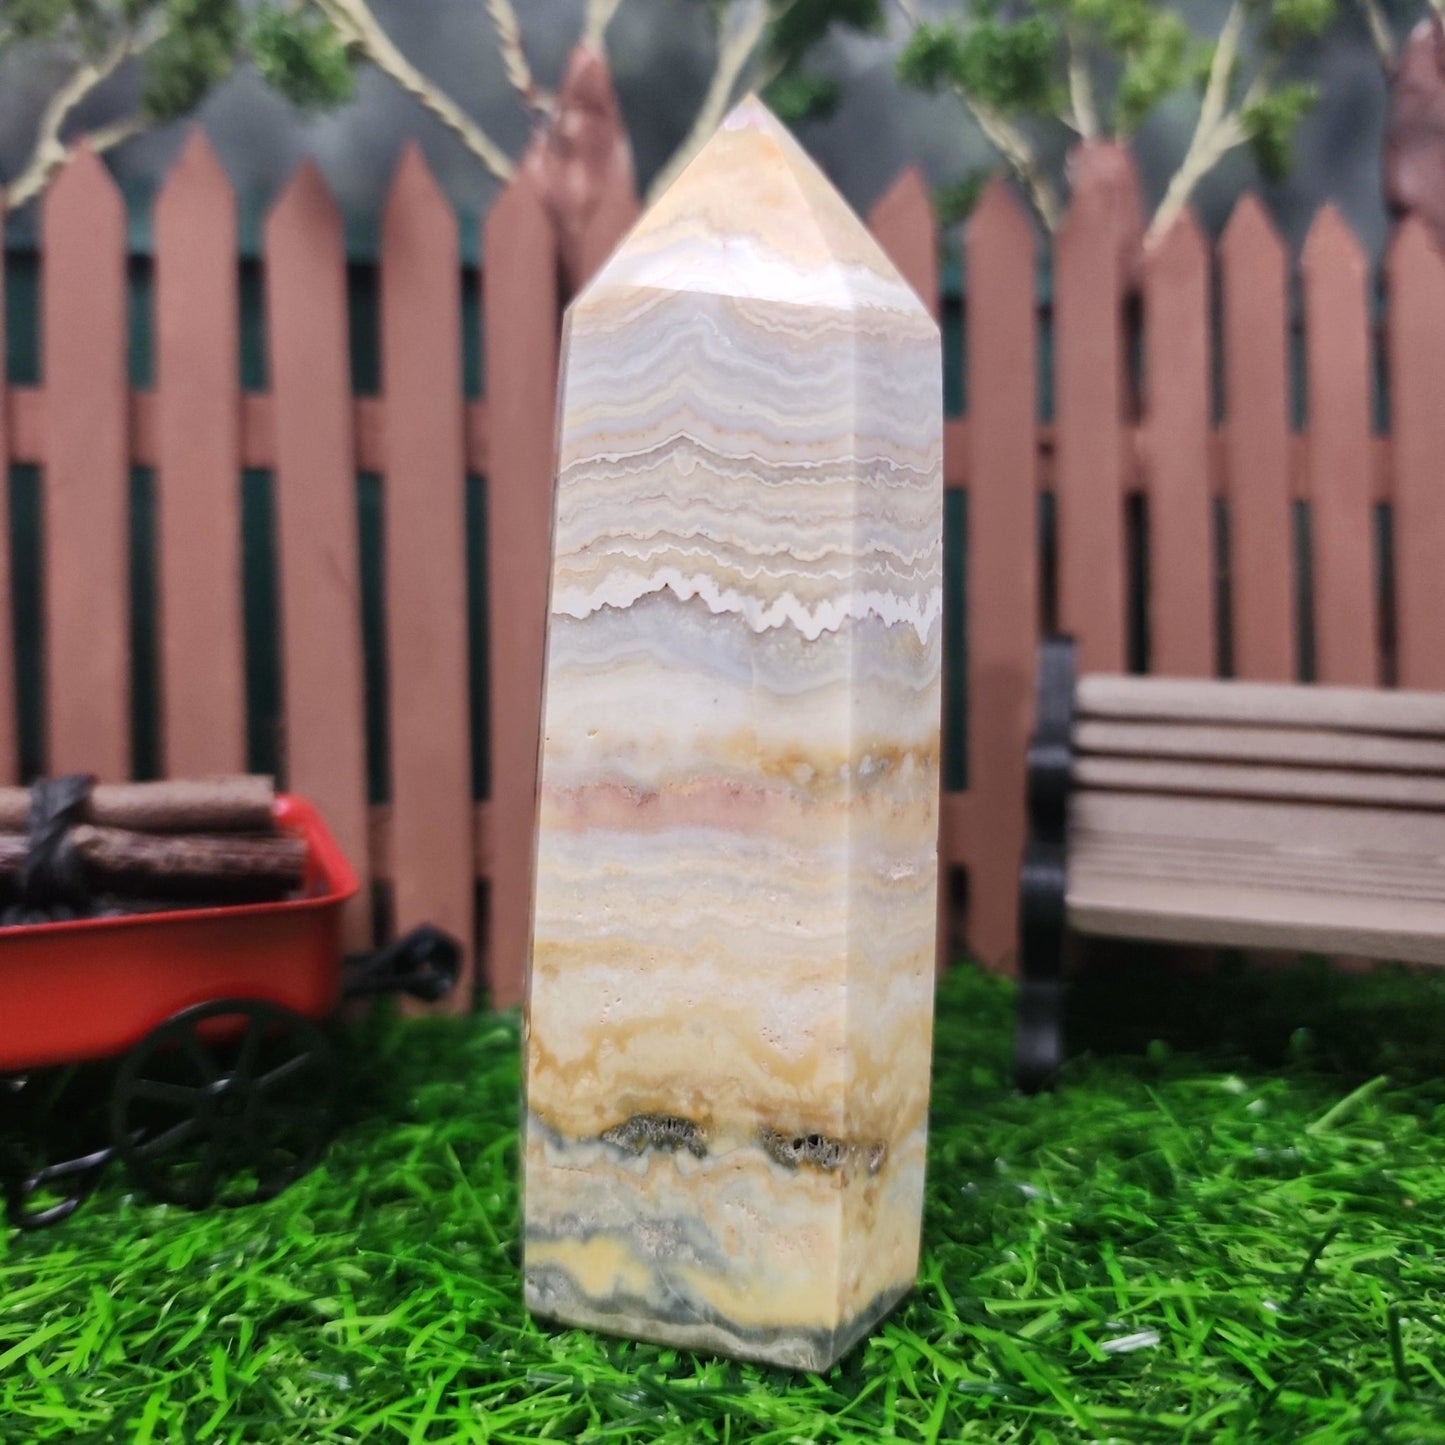 Calcite Tower - MagicBox Crystals